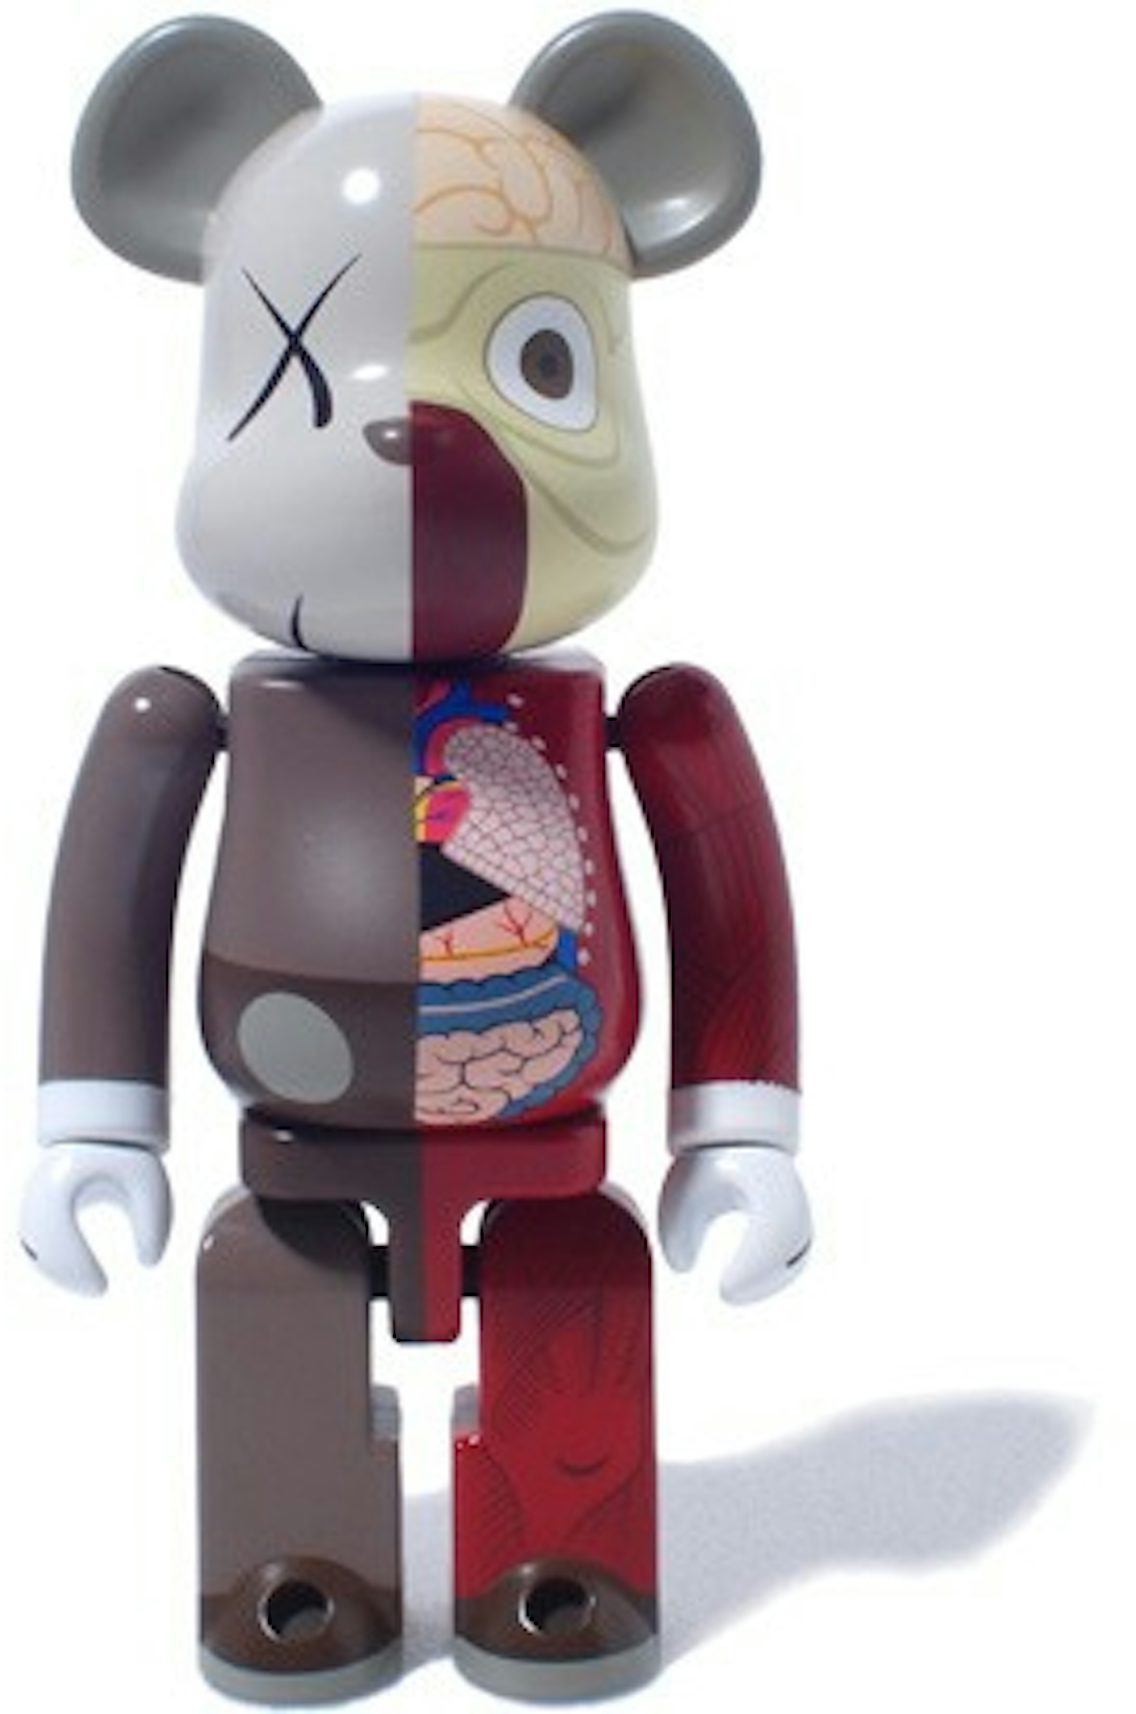 KAWS Bearbrick Dissected 400% Brown